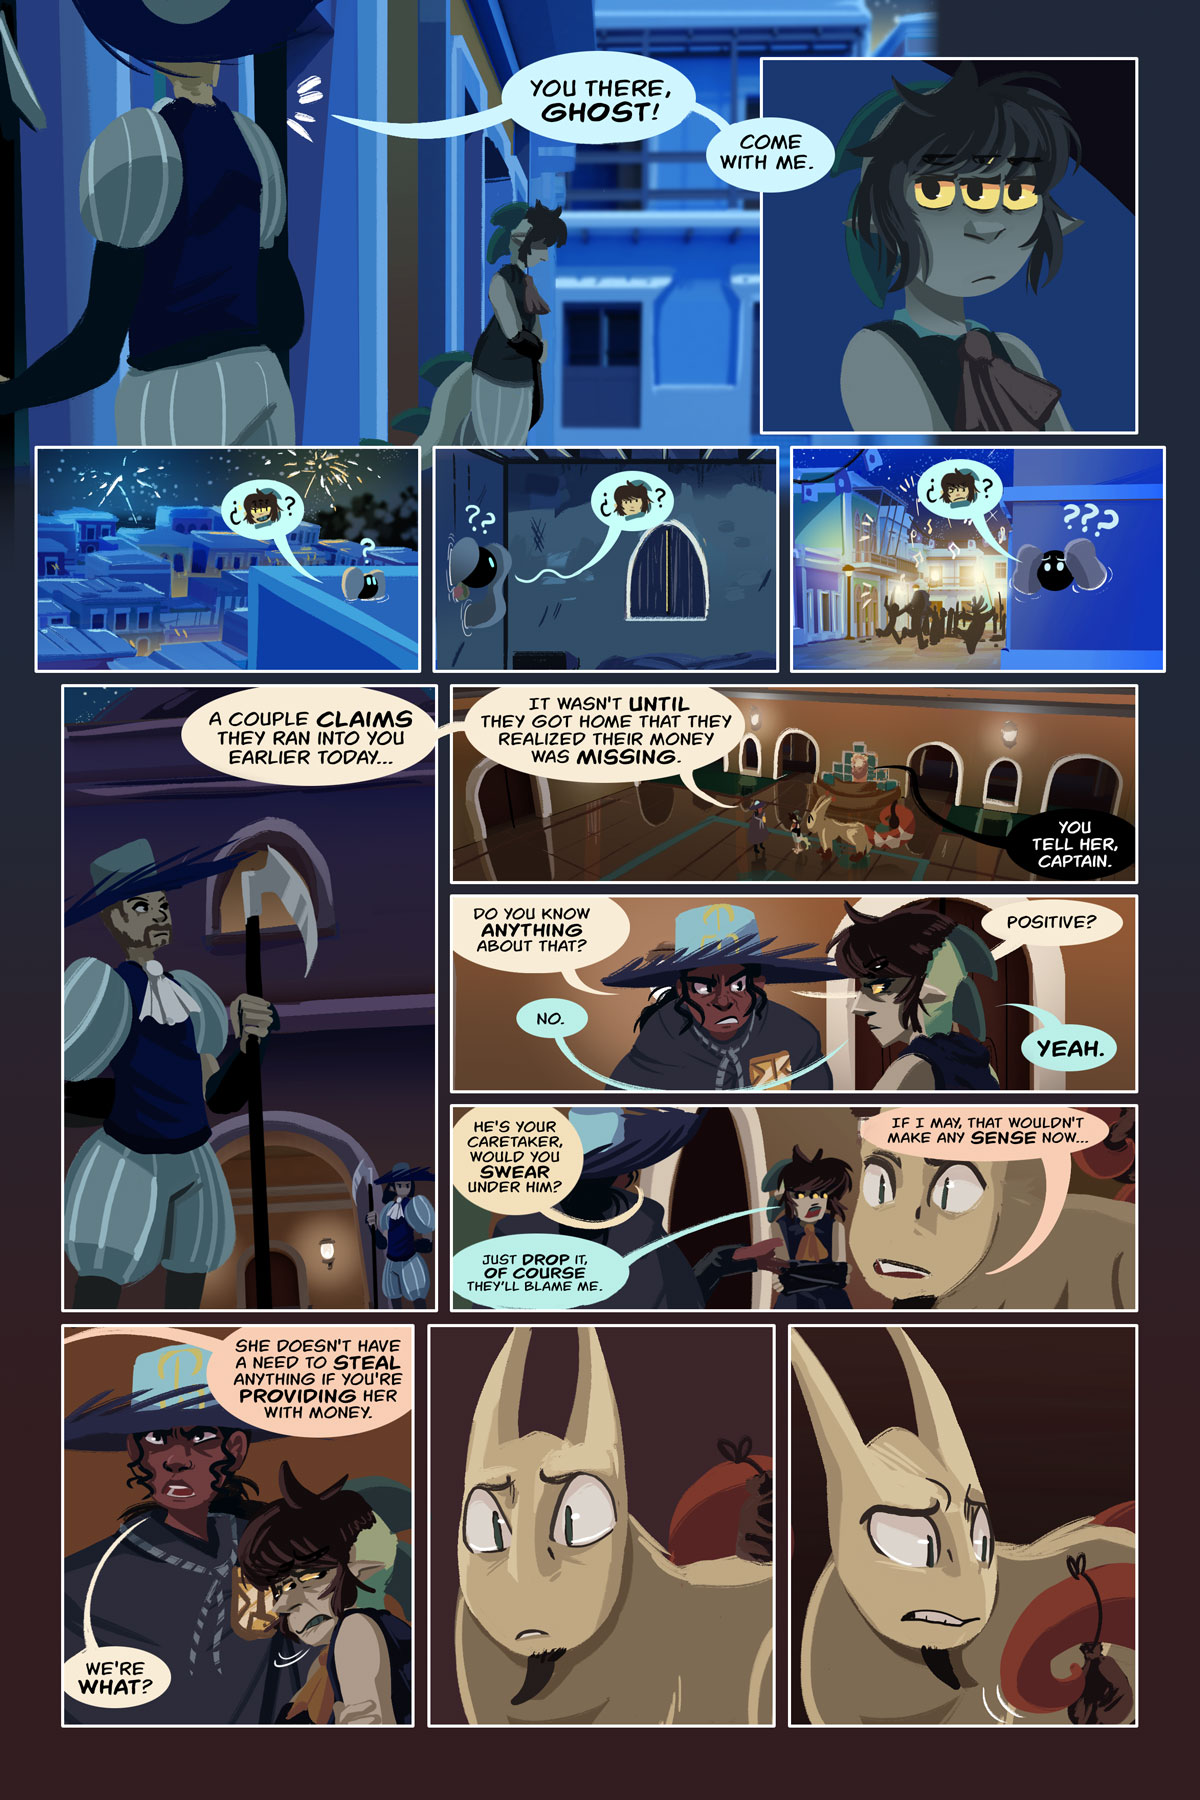 Chapter 8, page 35